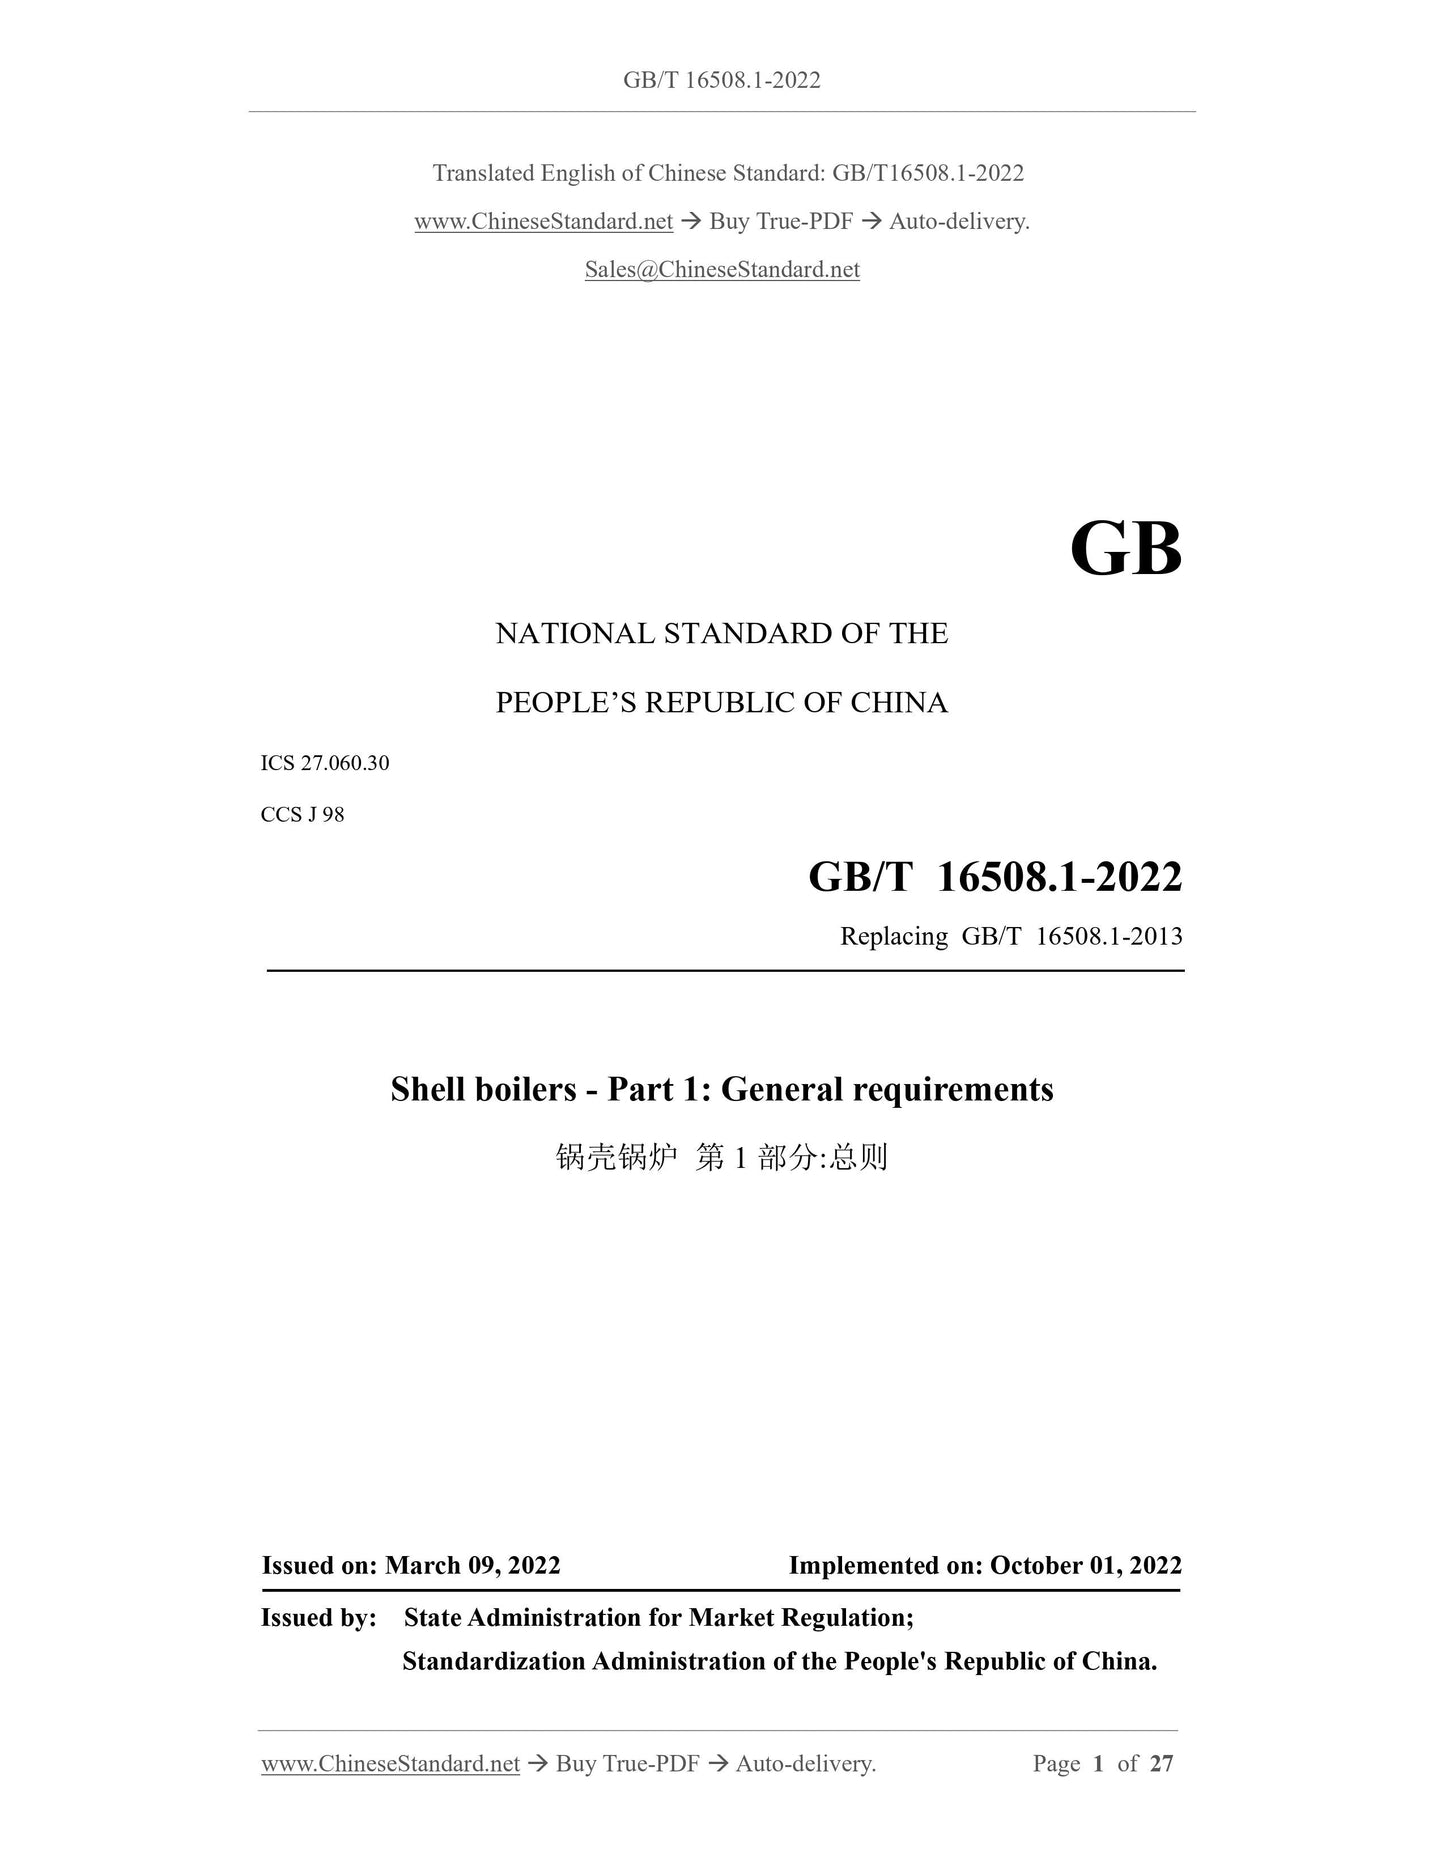 GB/T 16508.1-2022 Page 1